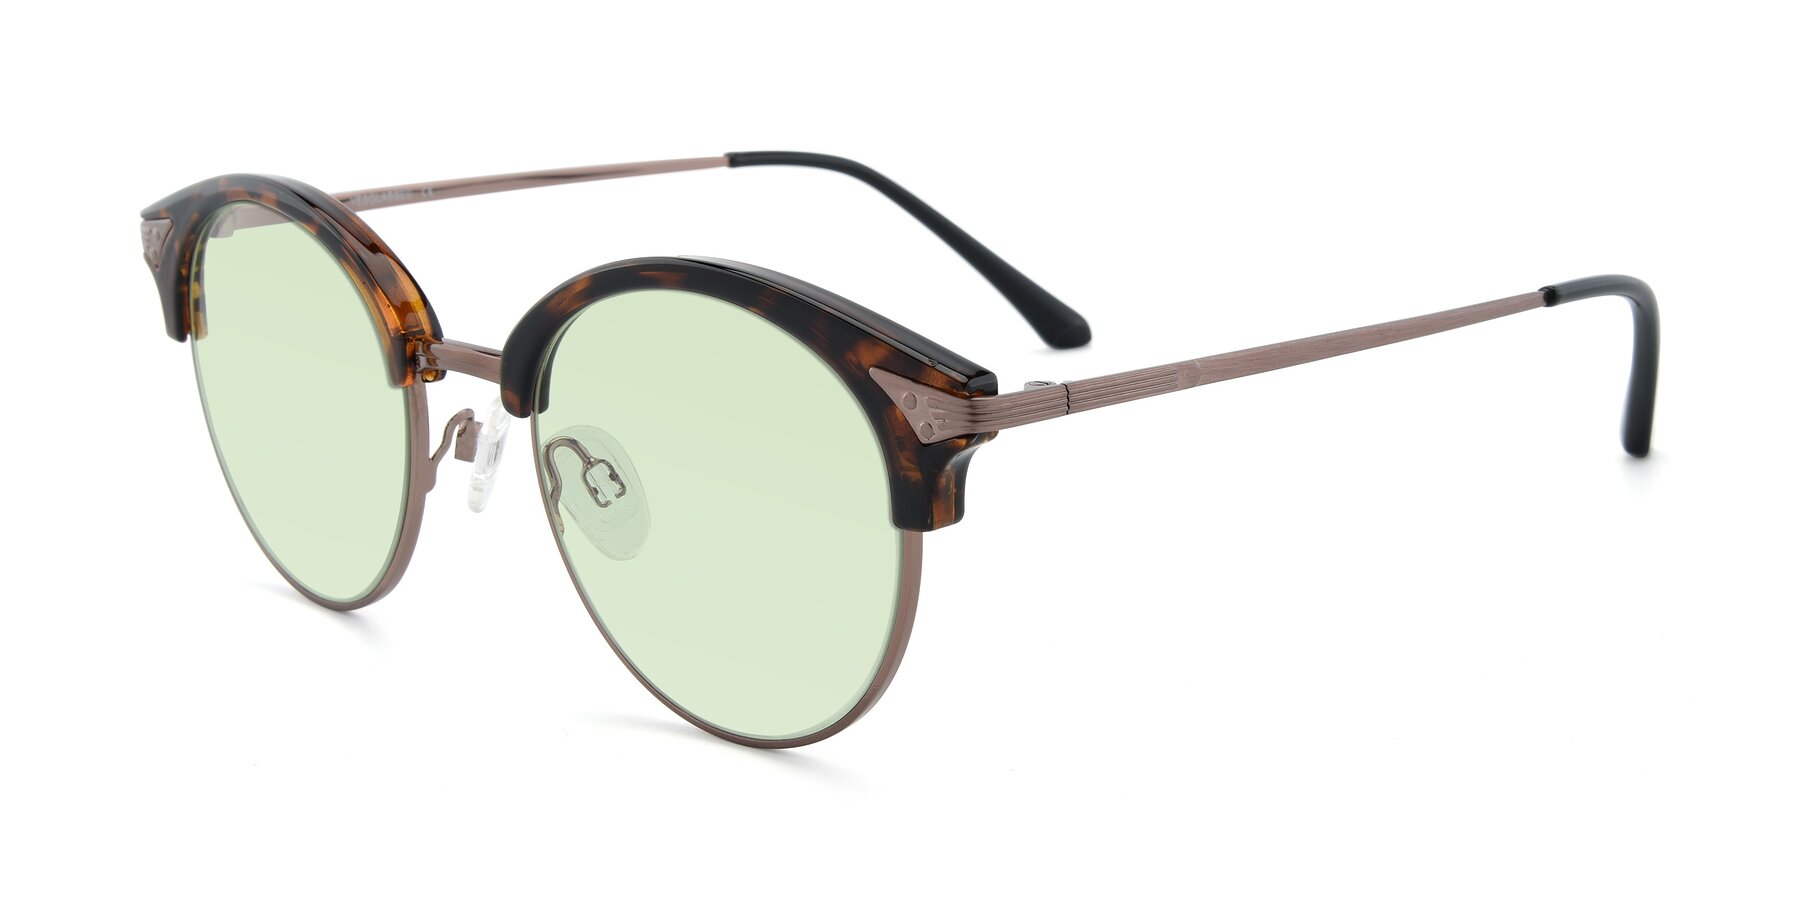 Angle of Hermione in Tortoise-Brown with Light Green Tinted Lenses